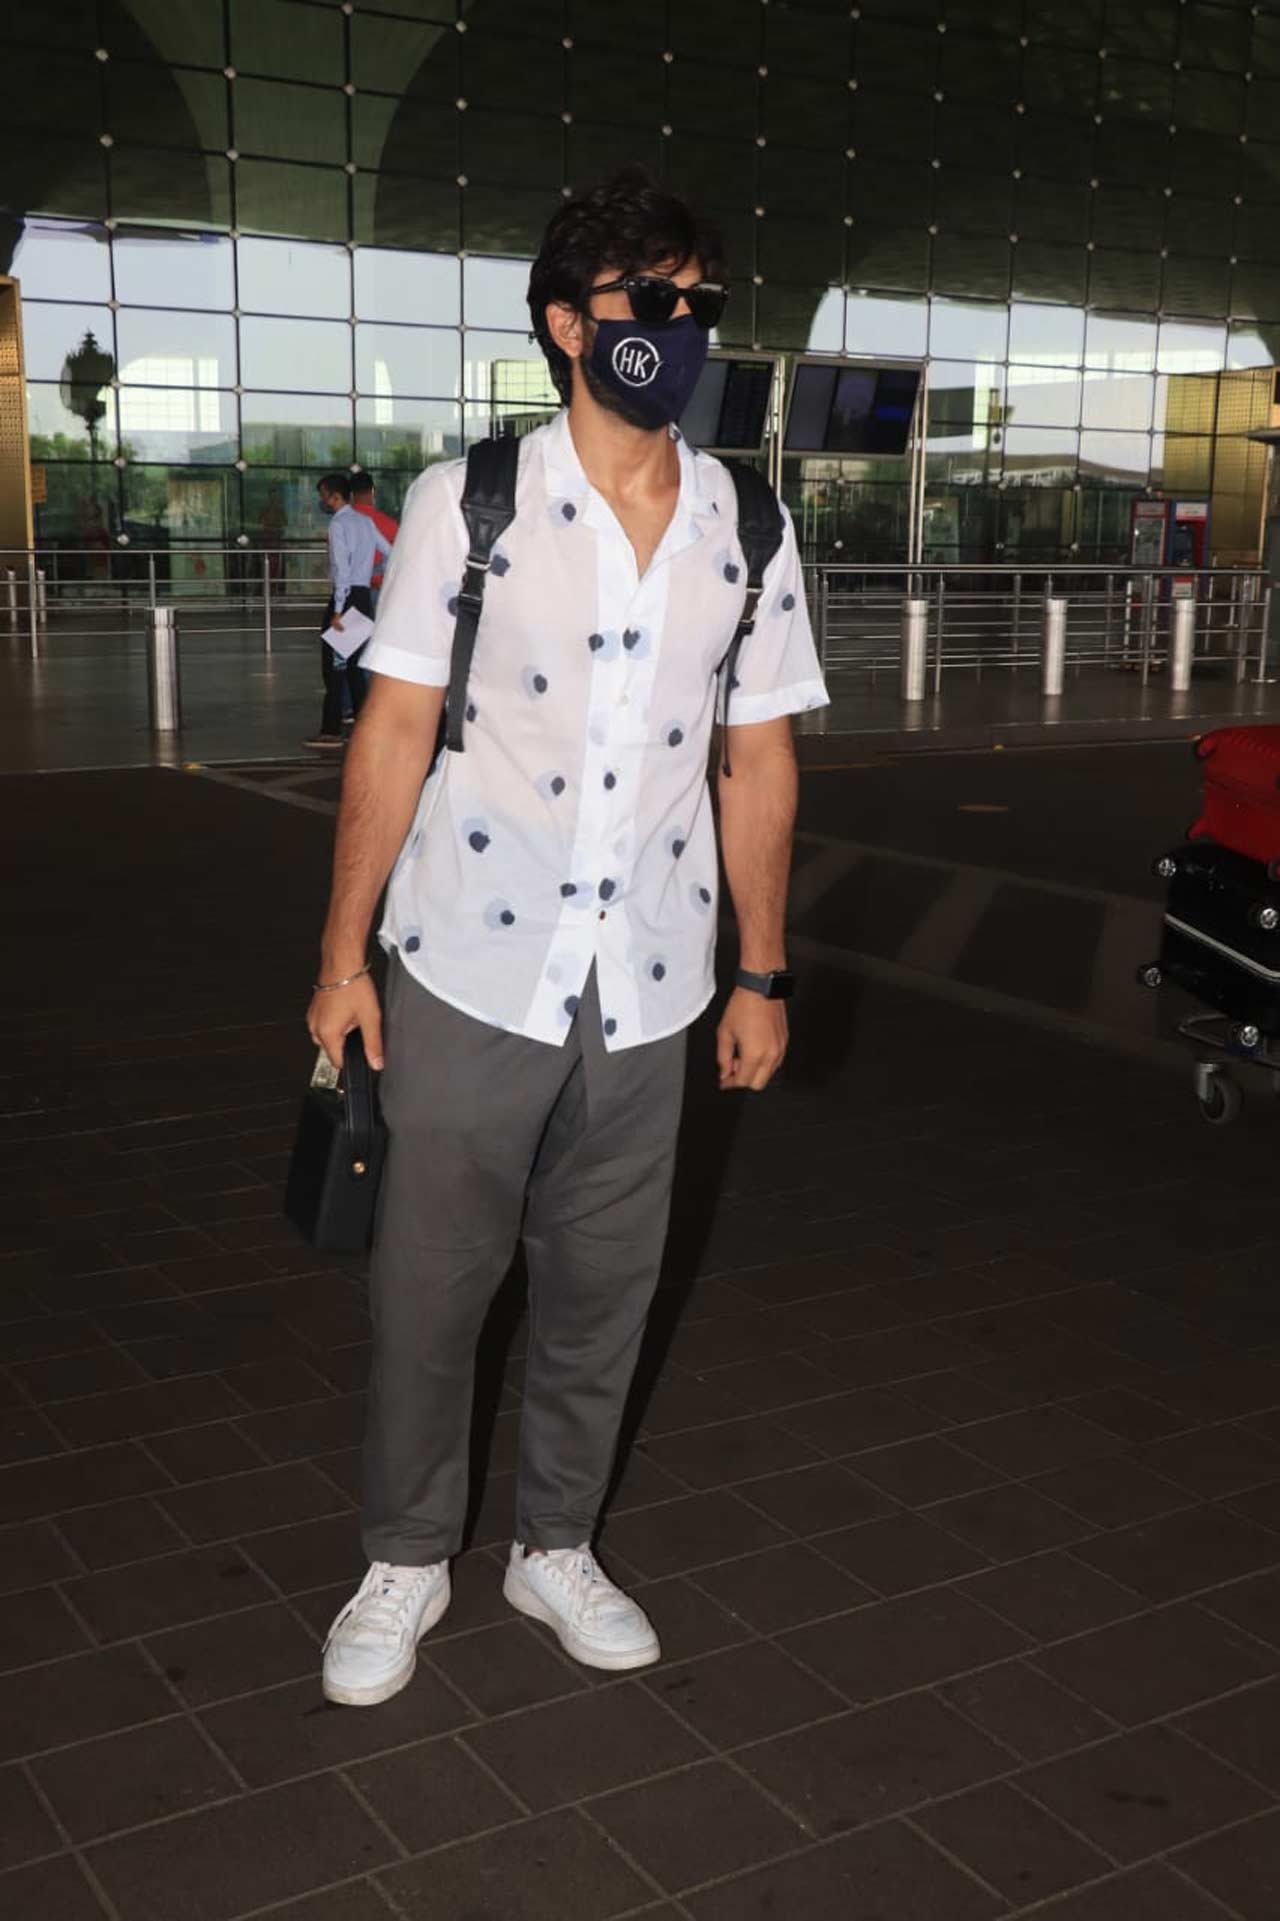 Himansh Kohli, the Yaariyaan star, was also clicked at the Mumbai airport. Speaking about his professional details, the actor, who was last seen in 'Boondi Raita' (2020) shared how he has been stuck due to the pandemic. As the projects are delayed, Himansh can't sign up for any new movies or shows due to prior commitments.